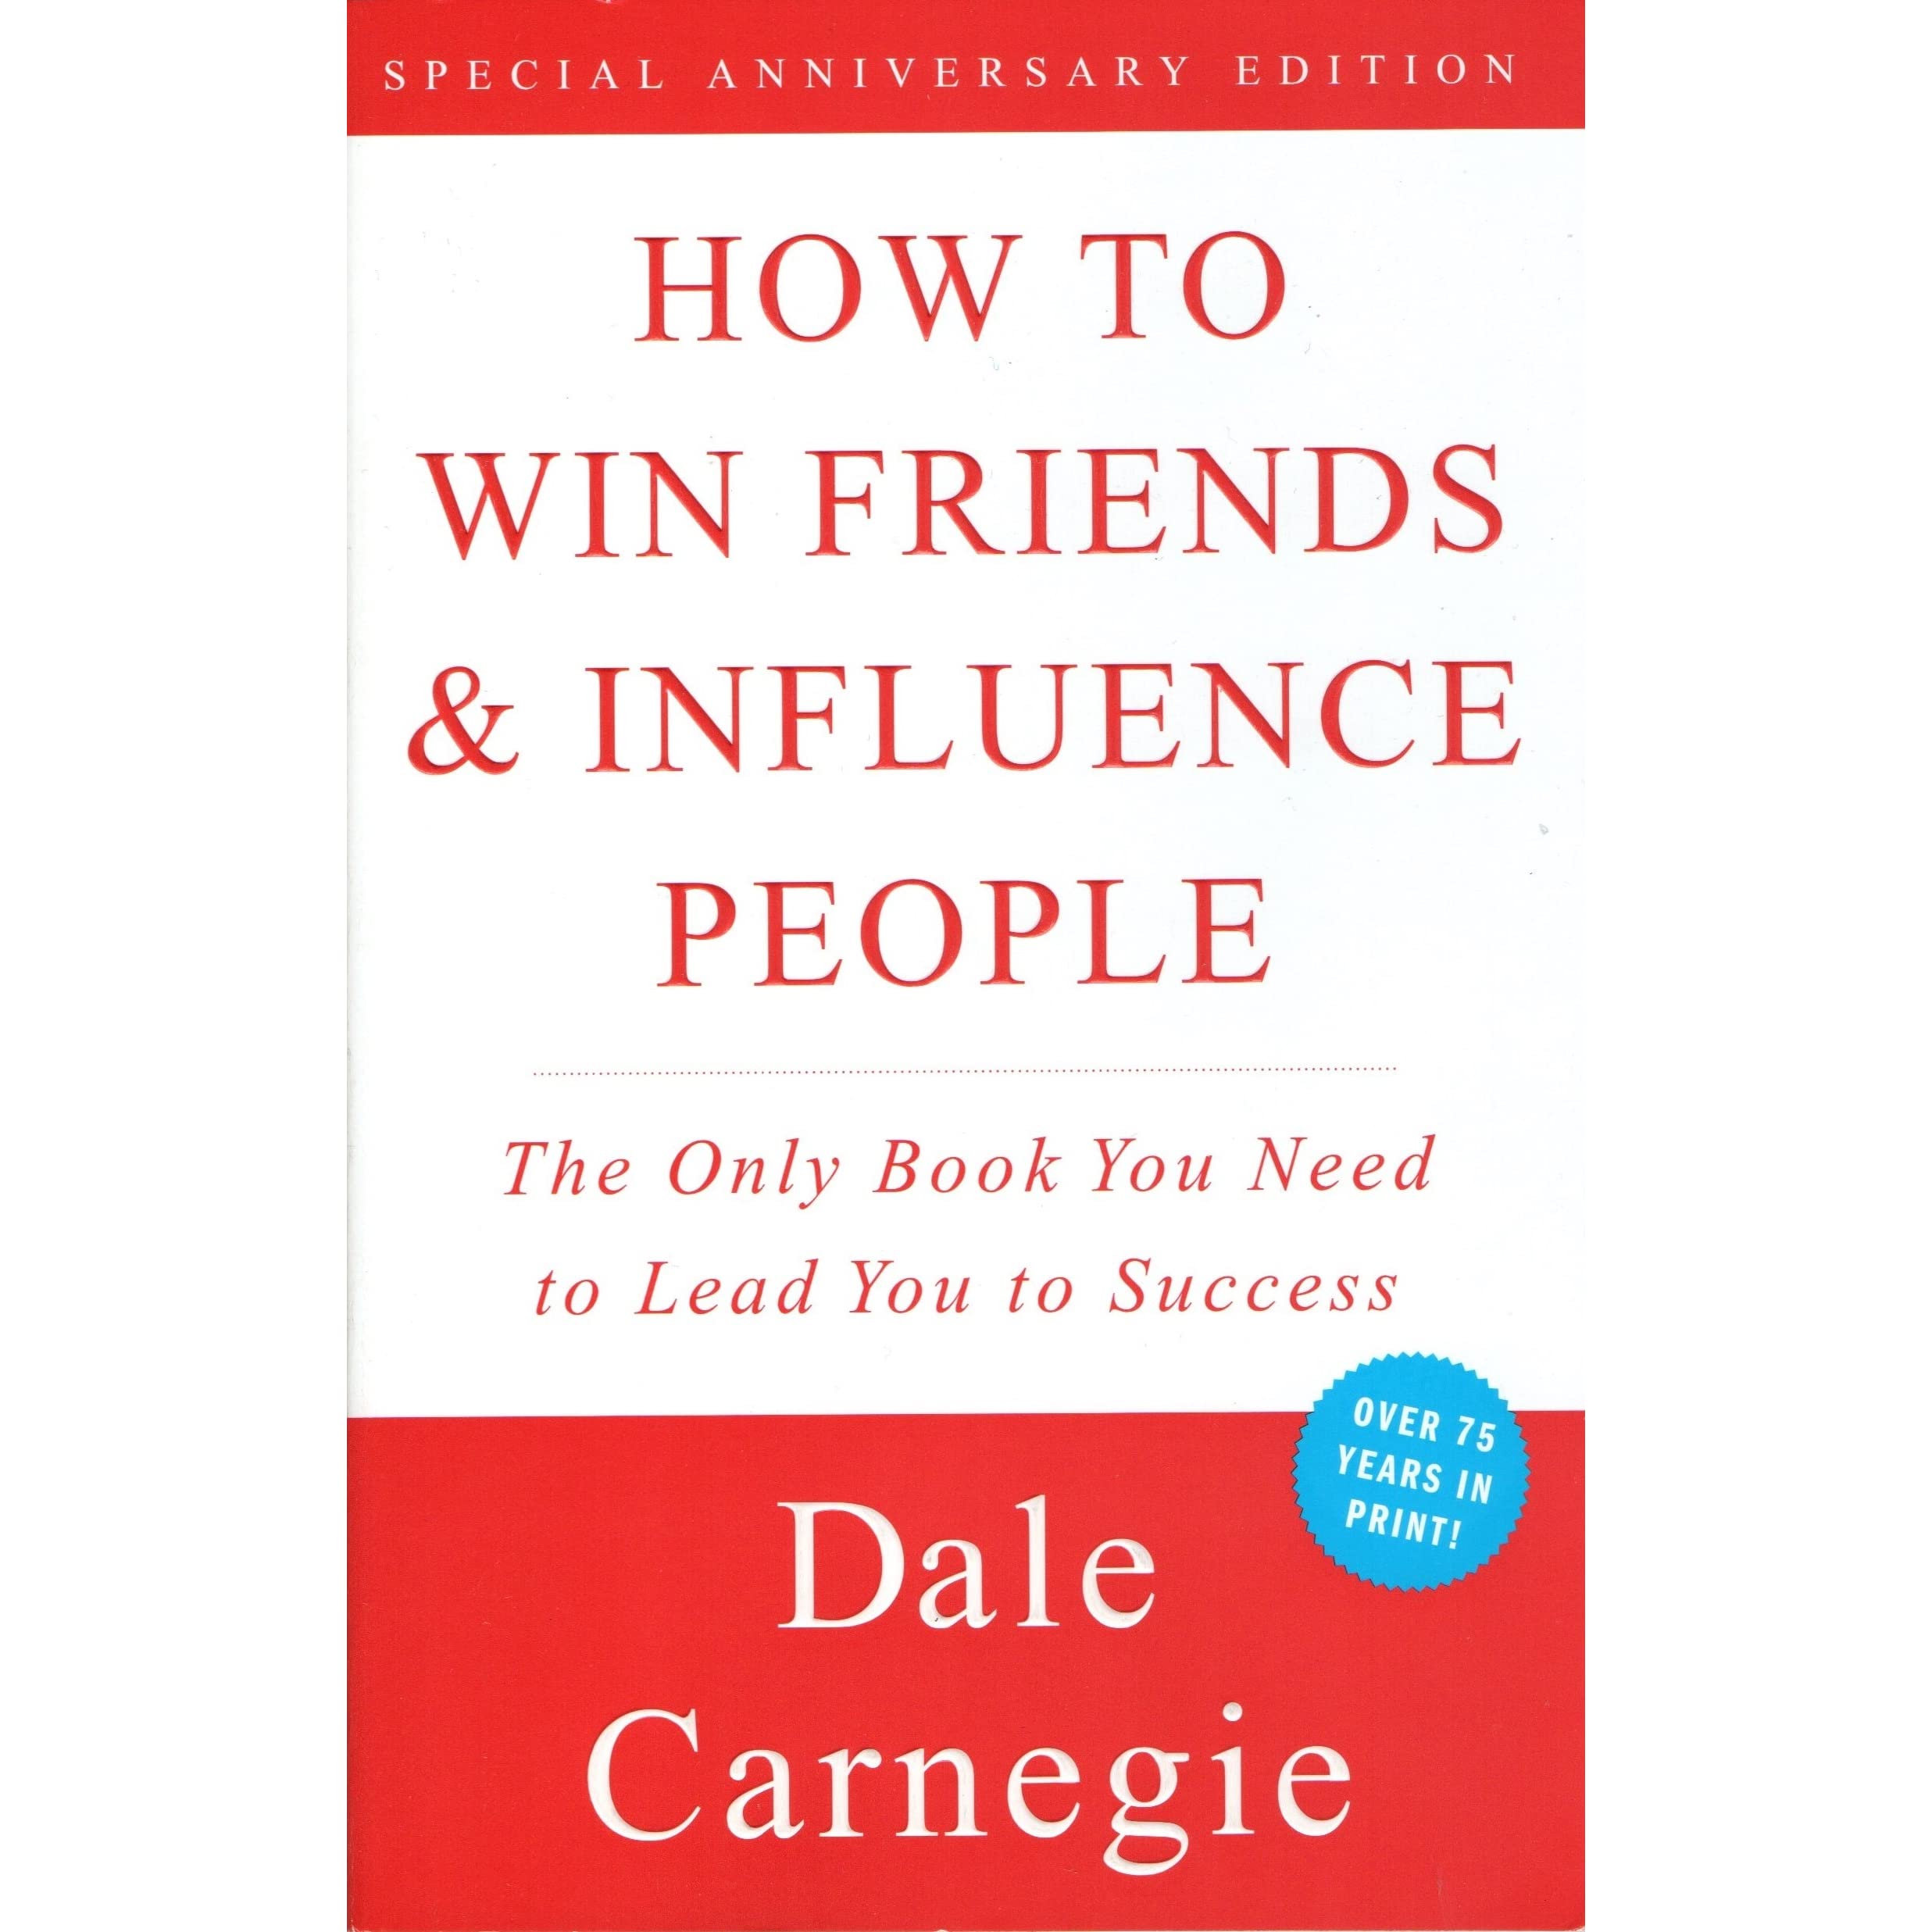 12. 'How to Win Friends and Influence People' by Dale Carnegie